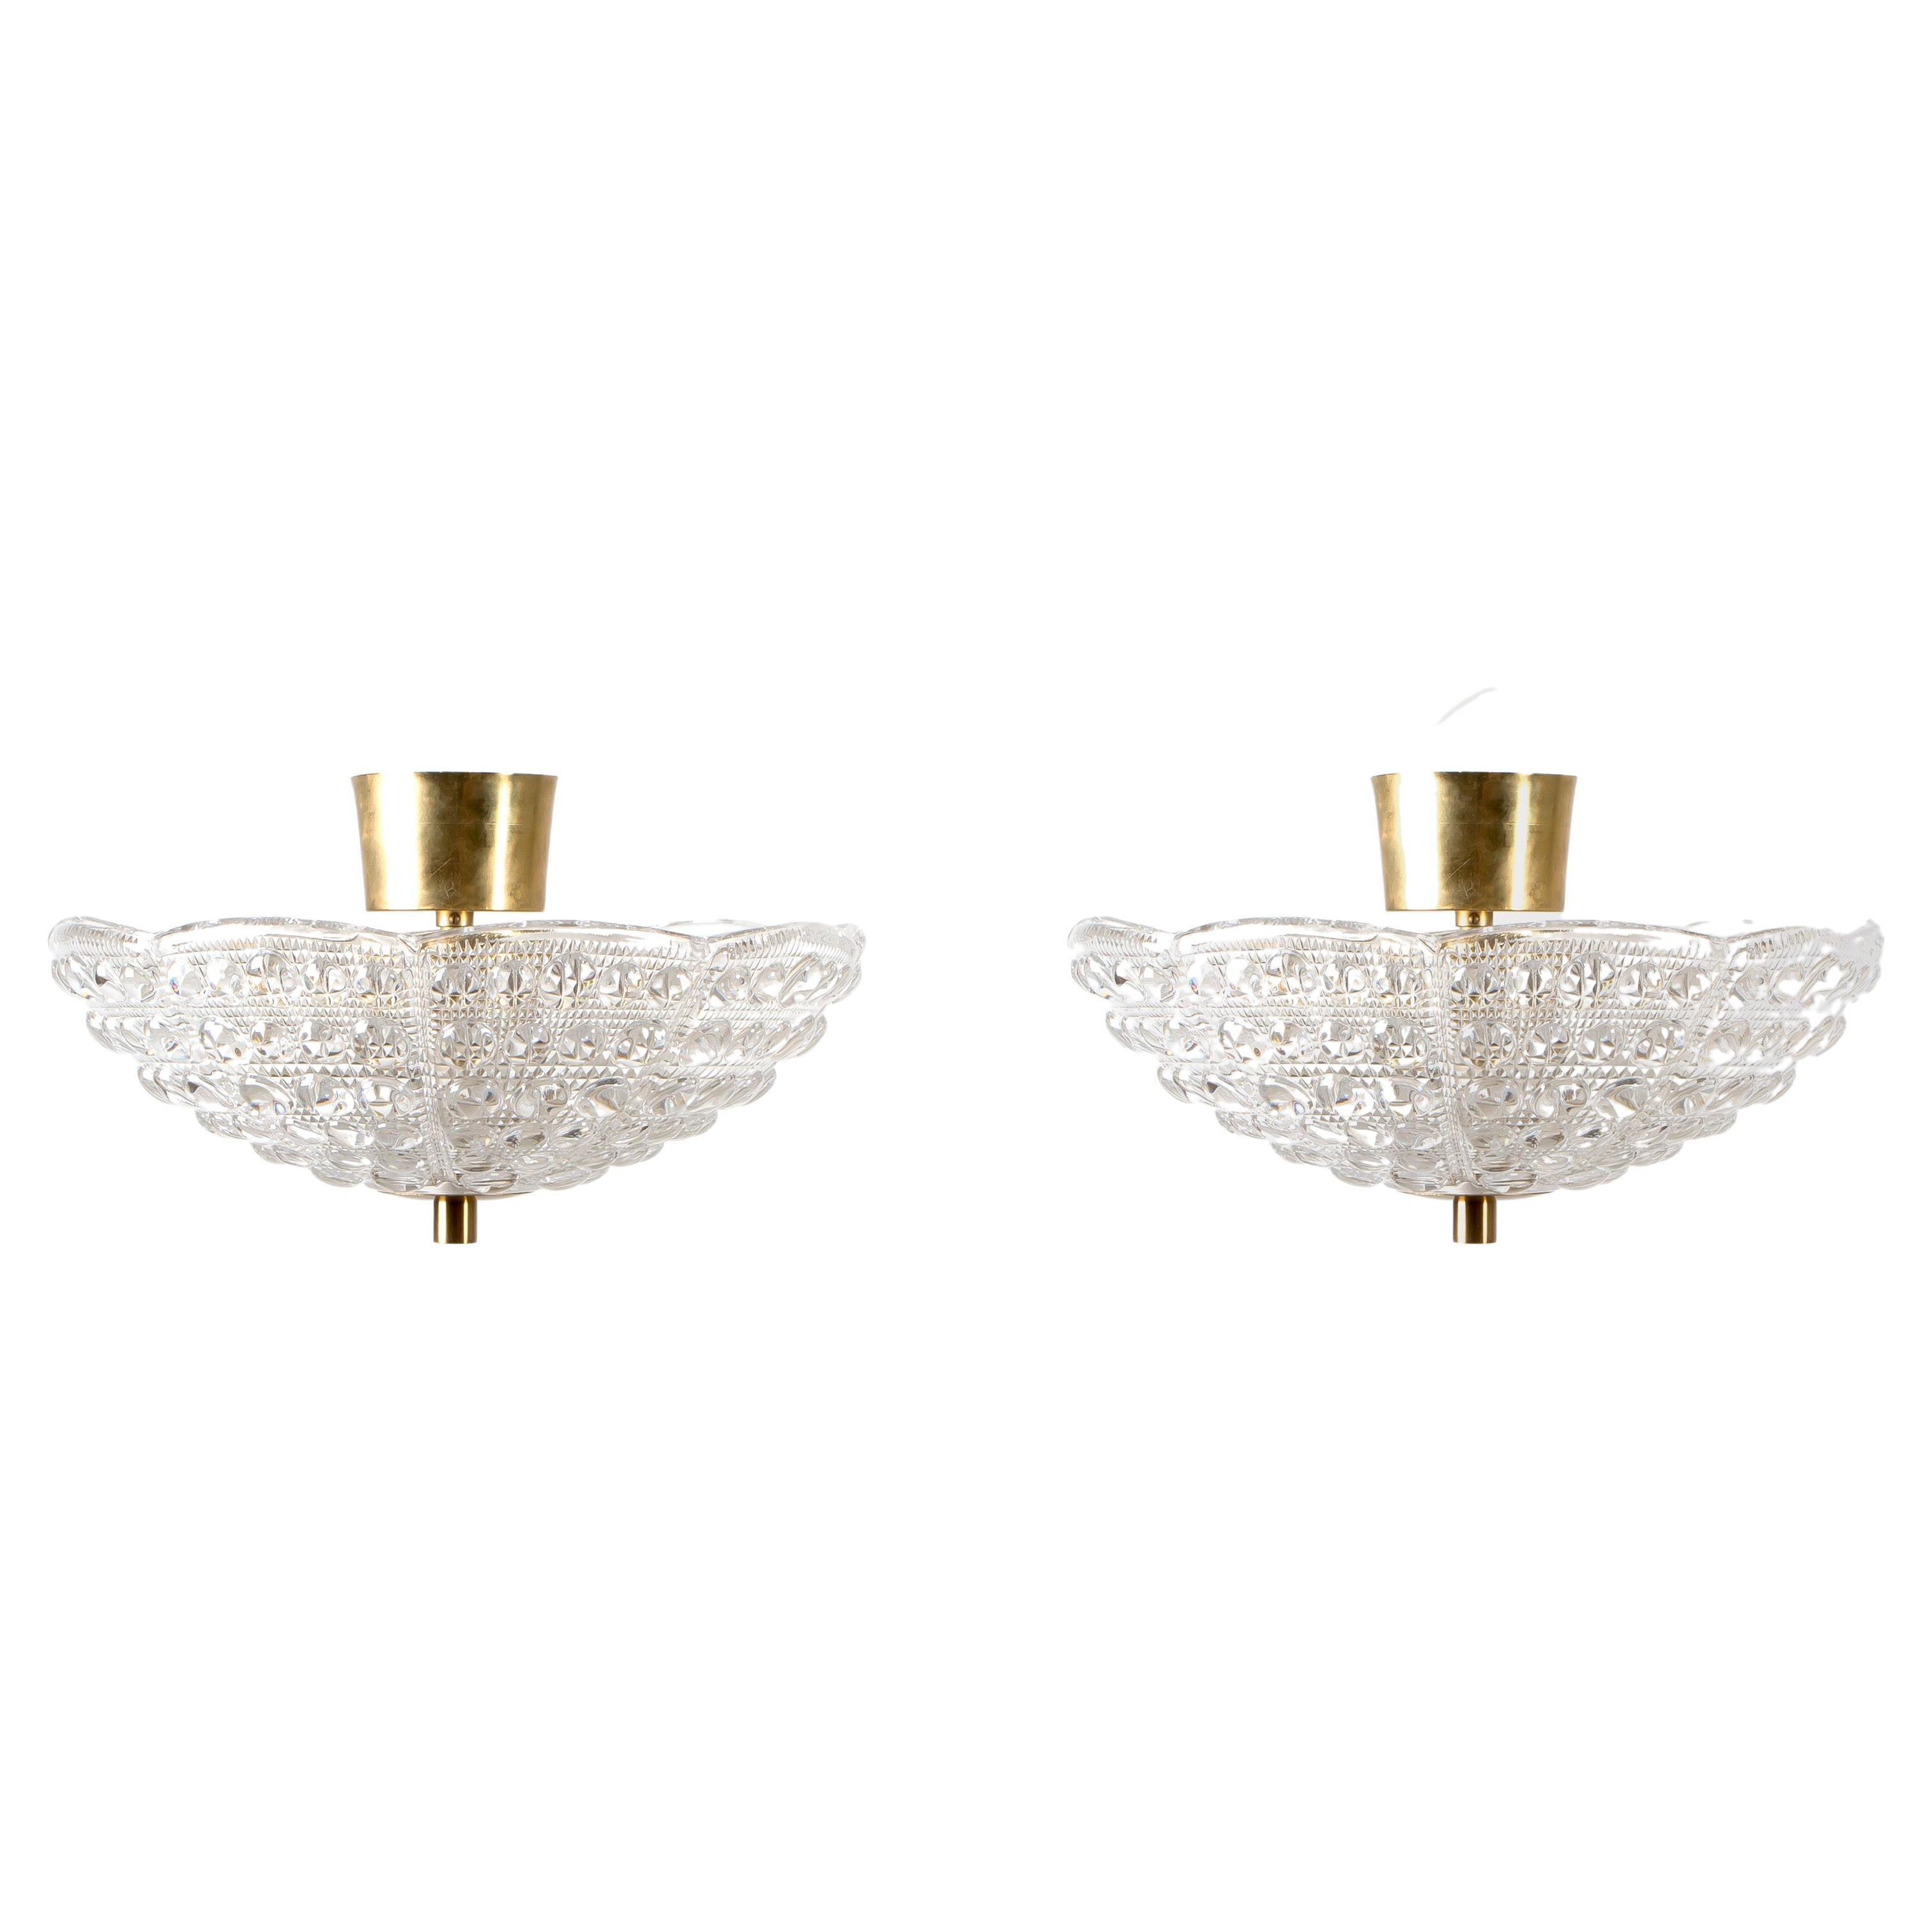 Pair of Ceiling Lights by Carl Fagerlund for Orrefors, 1970s